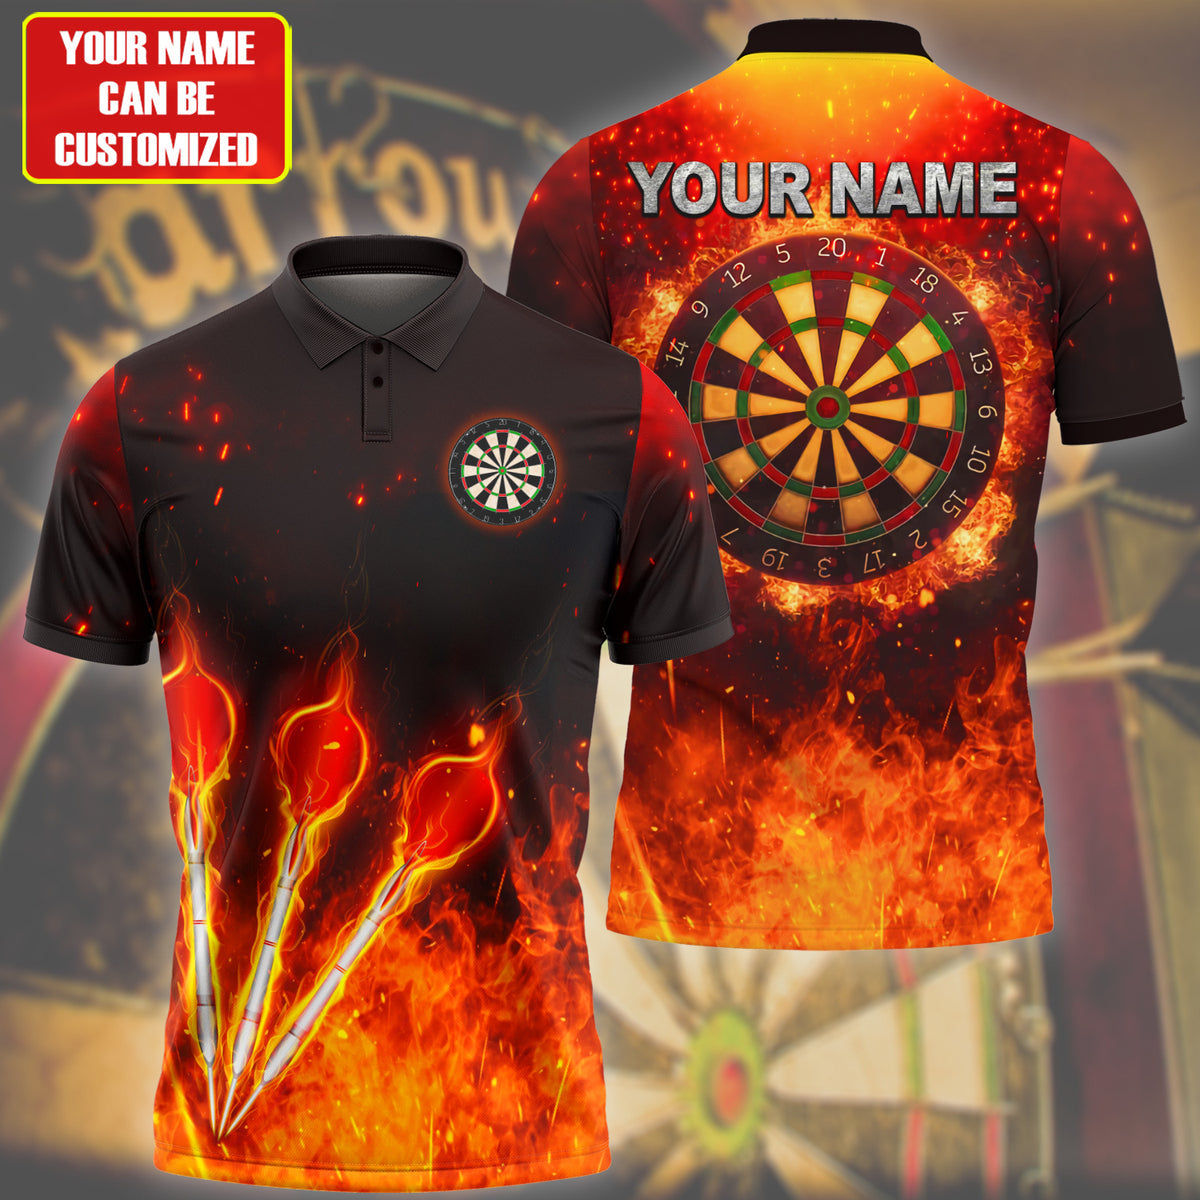 Personalized With Name Fire Dar Polo Shirt Cool Shirt For Dar Team Players